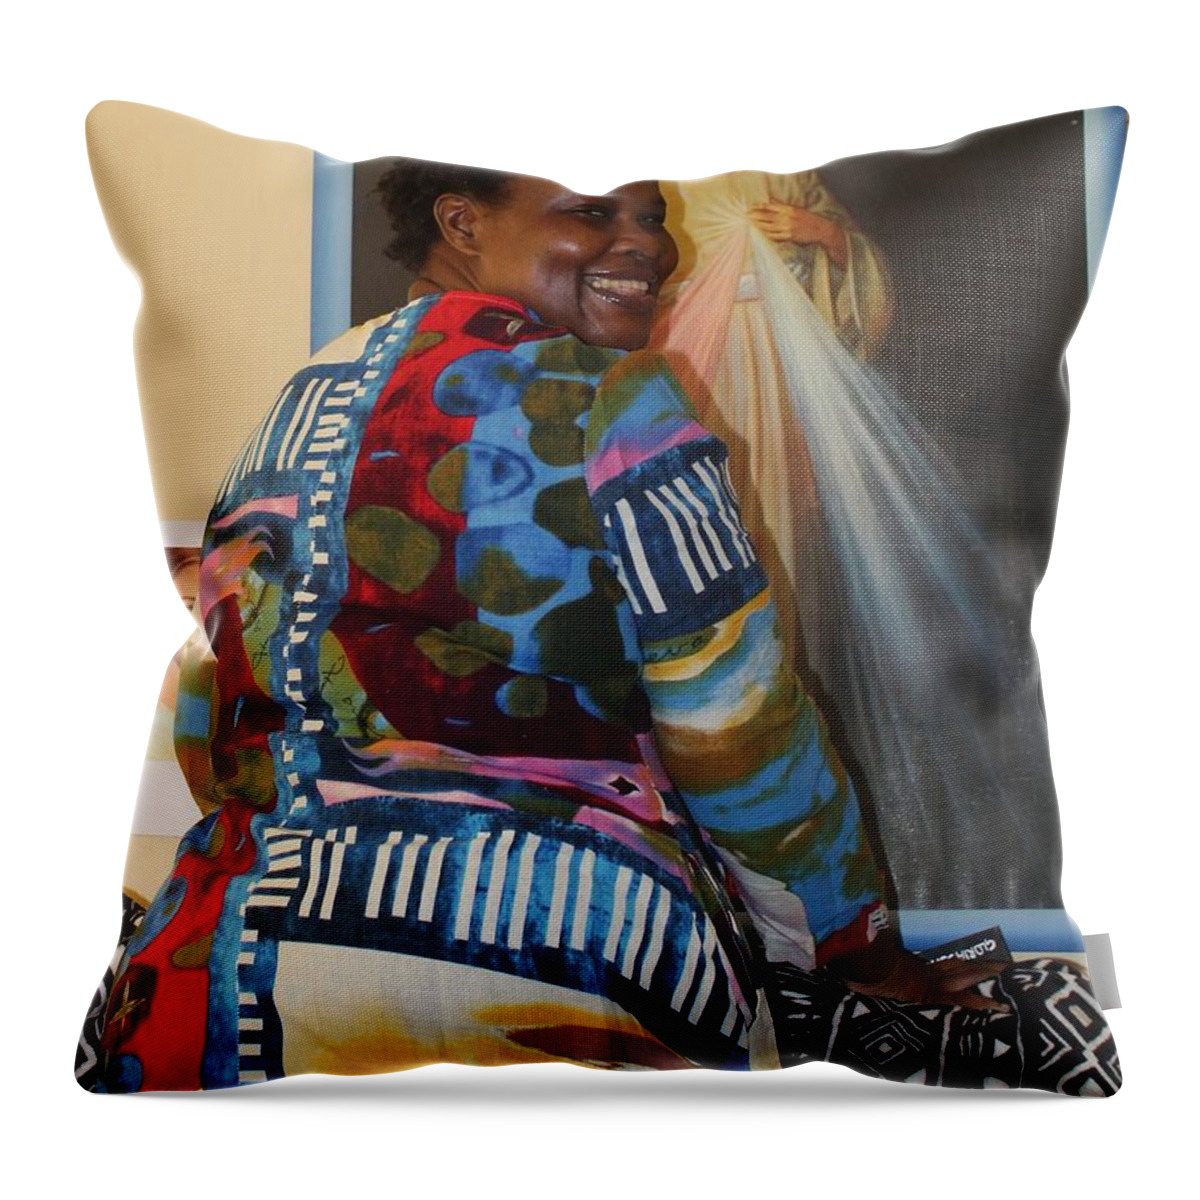 Jesus Throw Pillow featuring the photograph Ntusse by Gloria Ssali